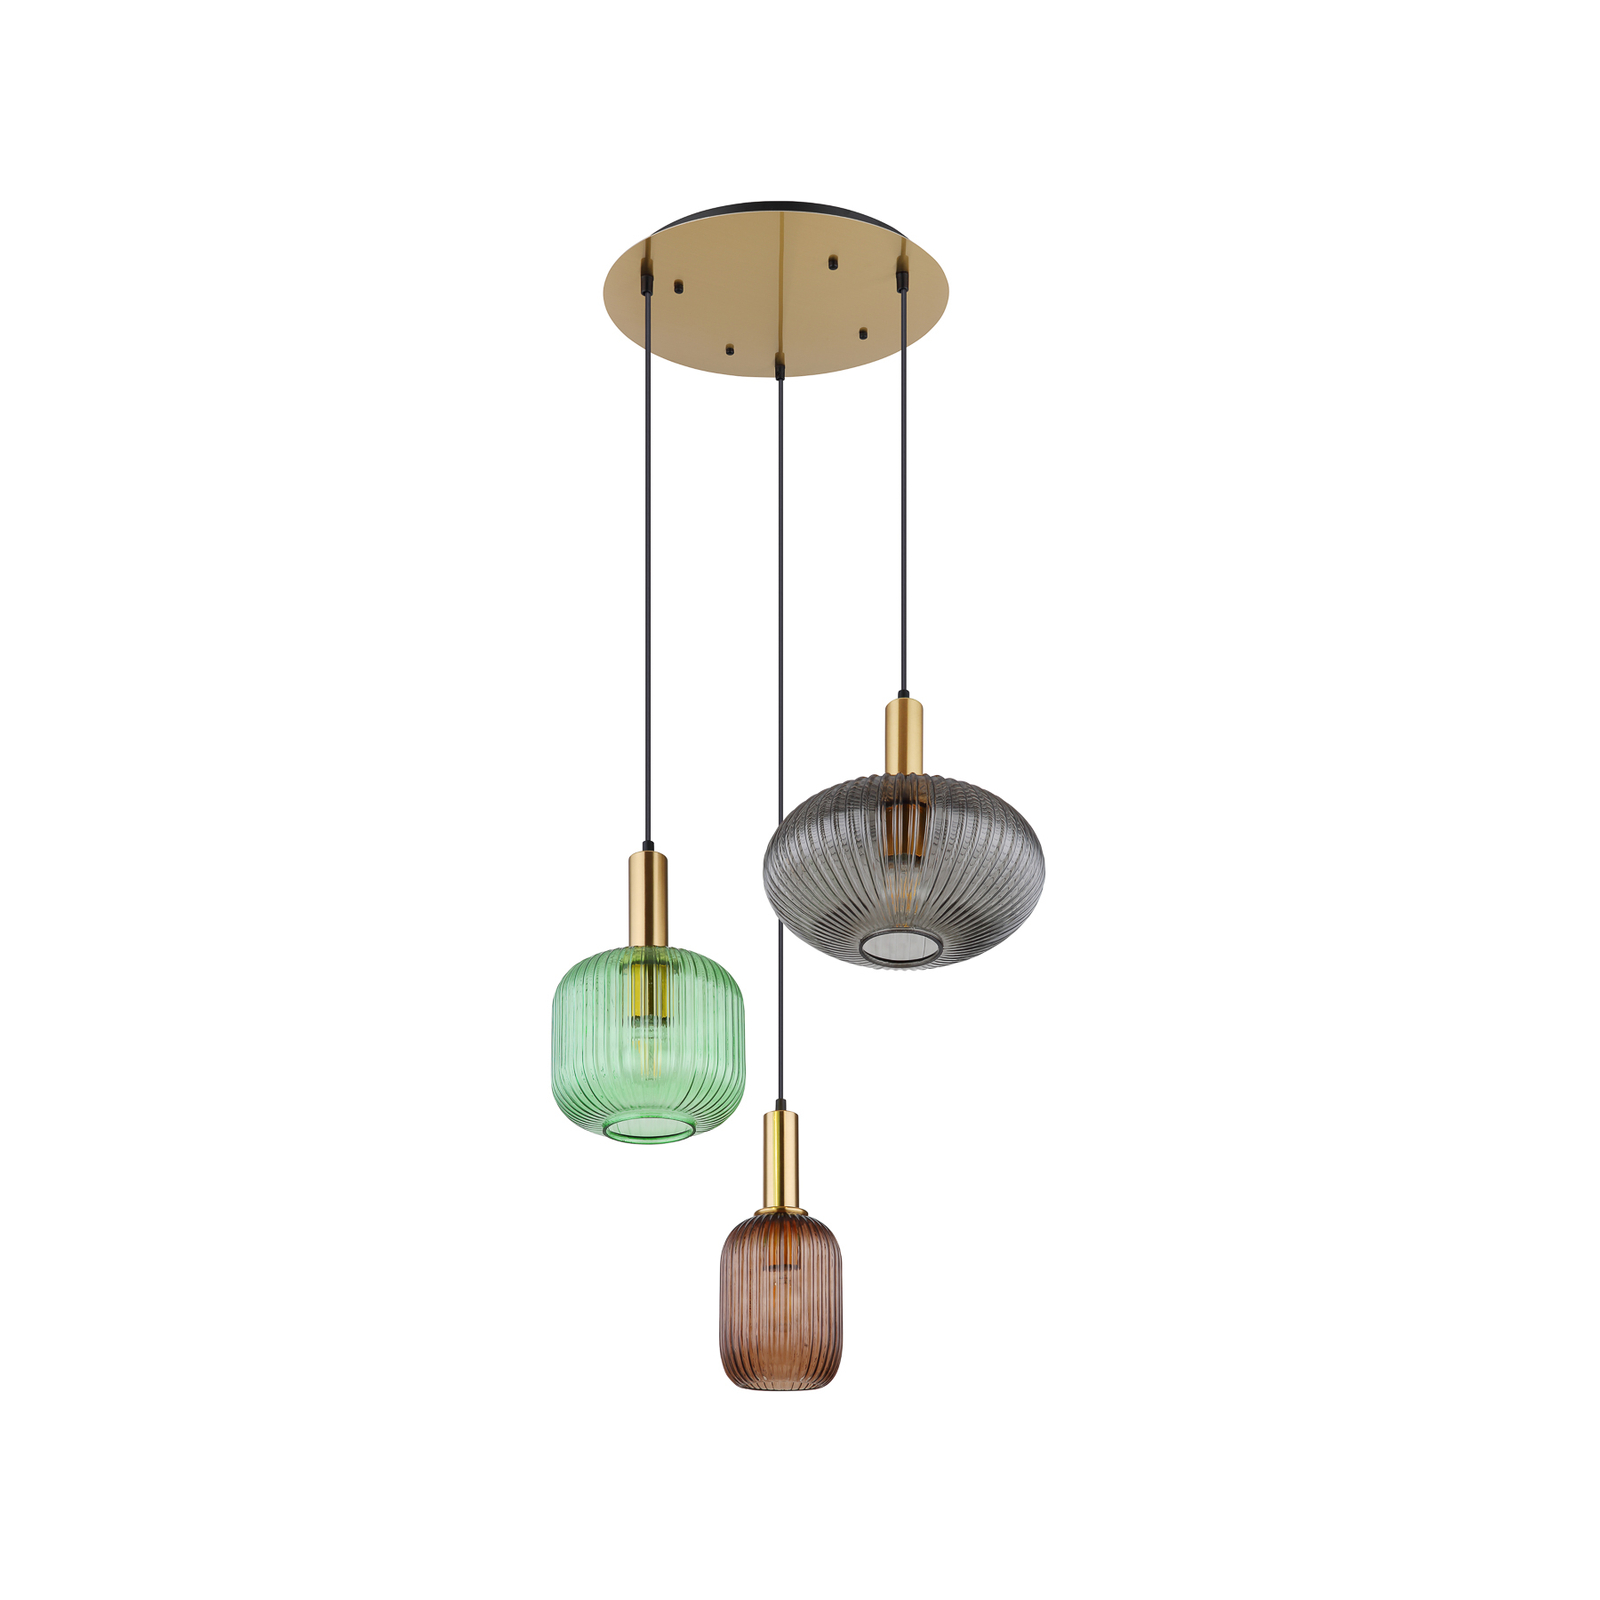 Hanglamp Normy, 3-lamps, Ø 55 cm